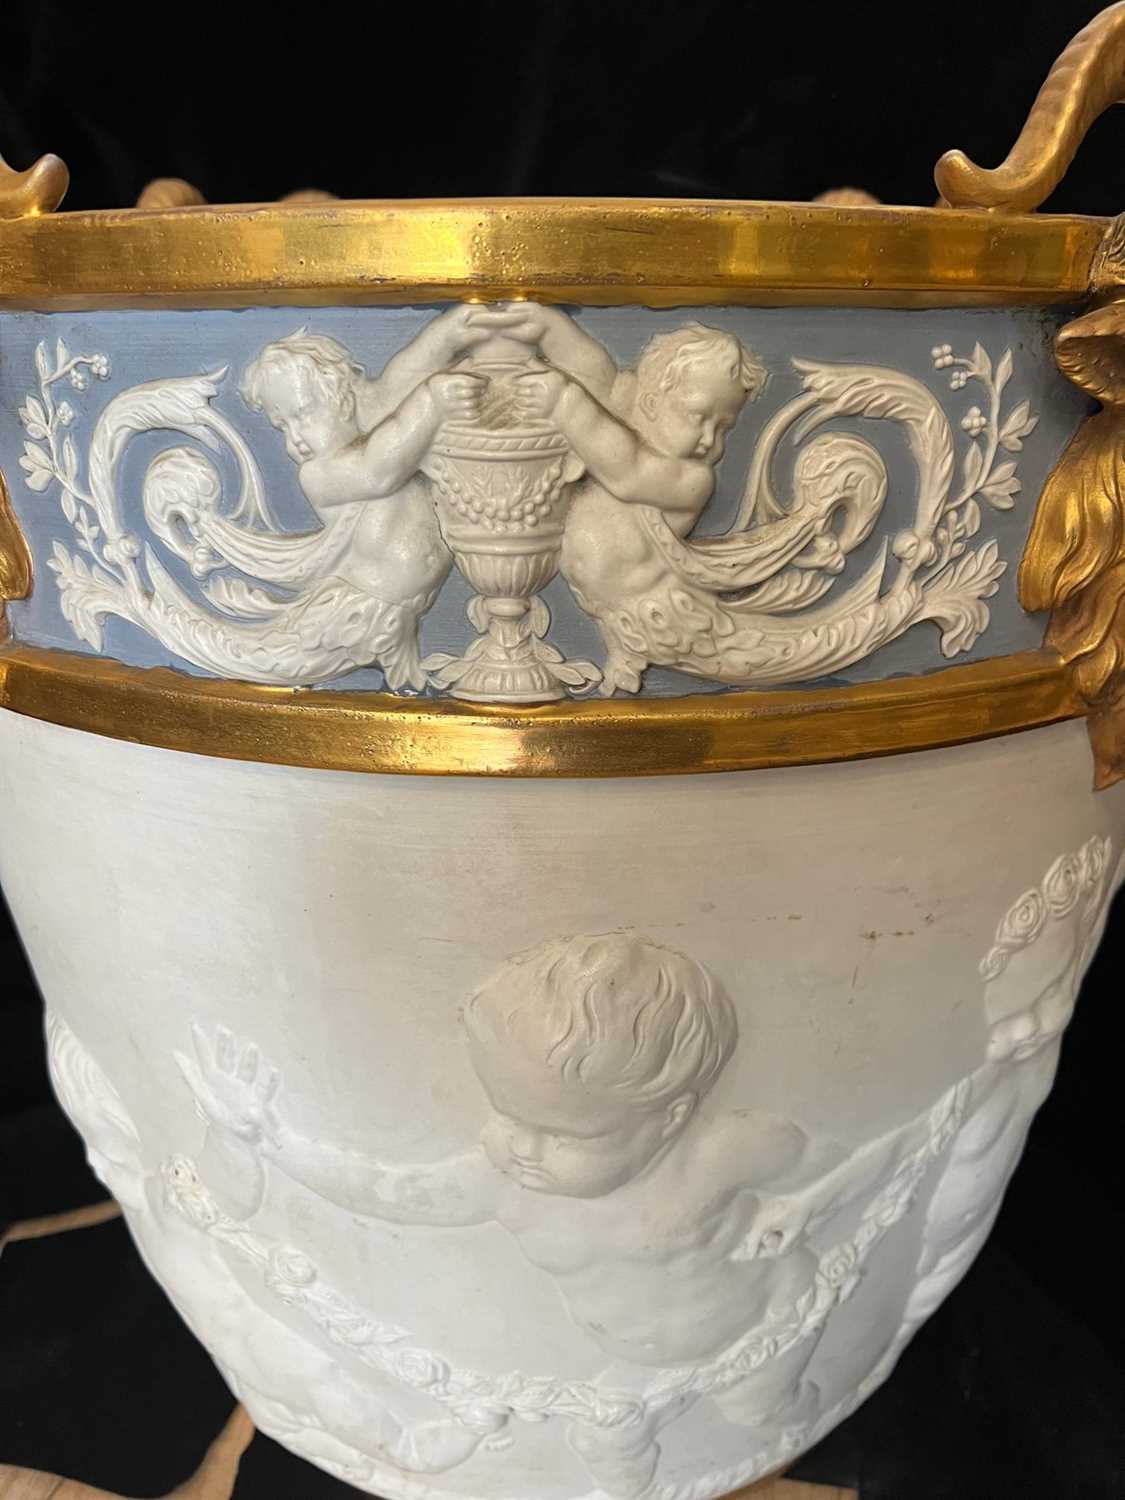 A LARGE 19TH CENTURY NEO-CLASSICAL STYLE BISQUE PORCELAIN AND PARCEL GILT JARDINIERE - Image 7 of 9